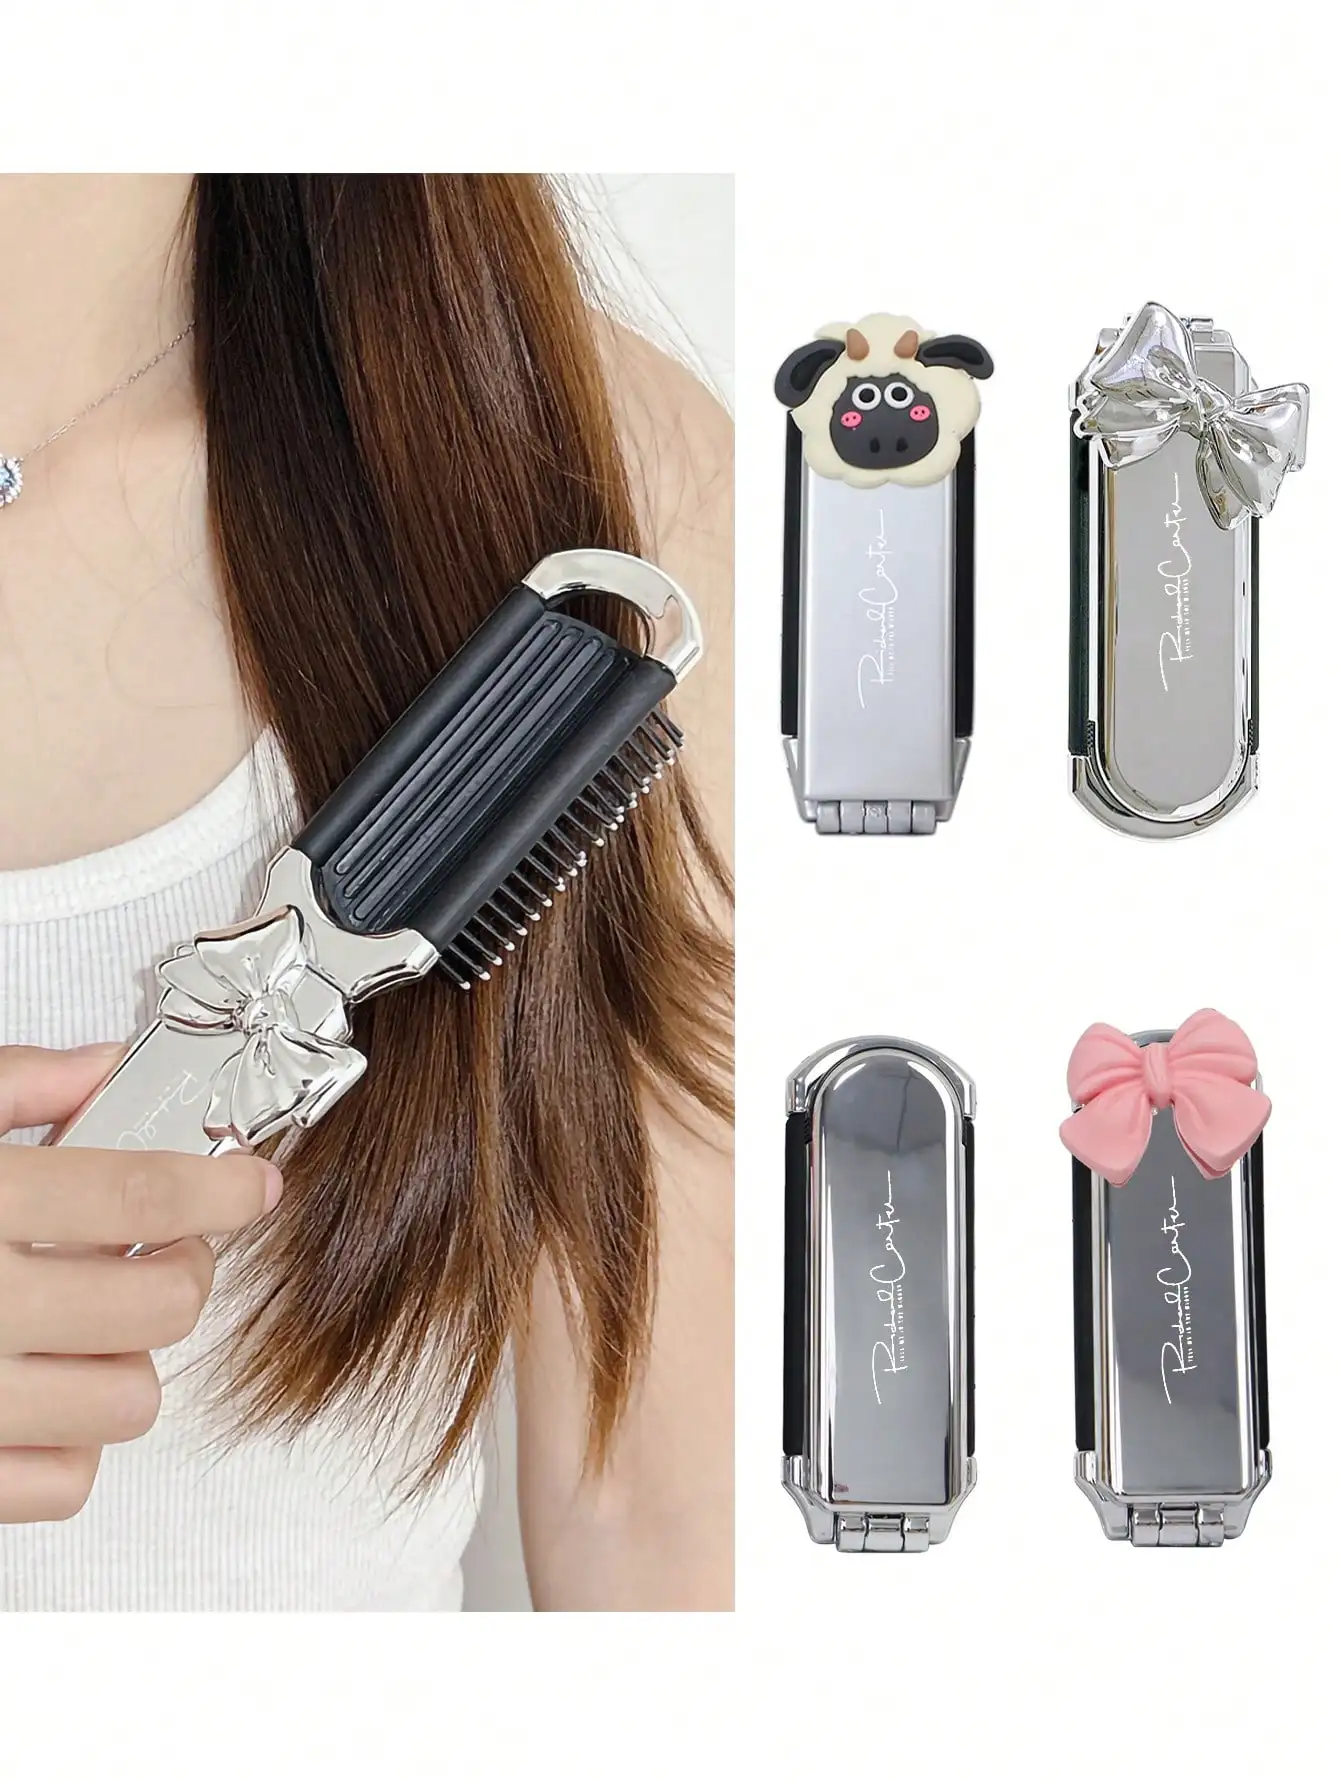 1pcs Folding Hairdressing Comb With Makeup Mirror, Portable Air Cushion Comb, Suitable For Daily Outgoing Travel Use 1pcs folding hairdressing comb with makeup mirror portable air cushion comb suitable for daily outgoing travel use